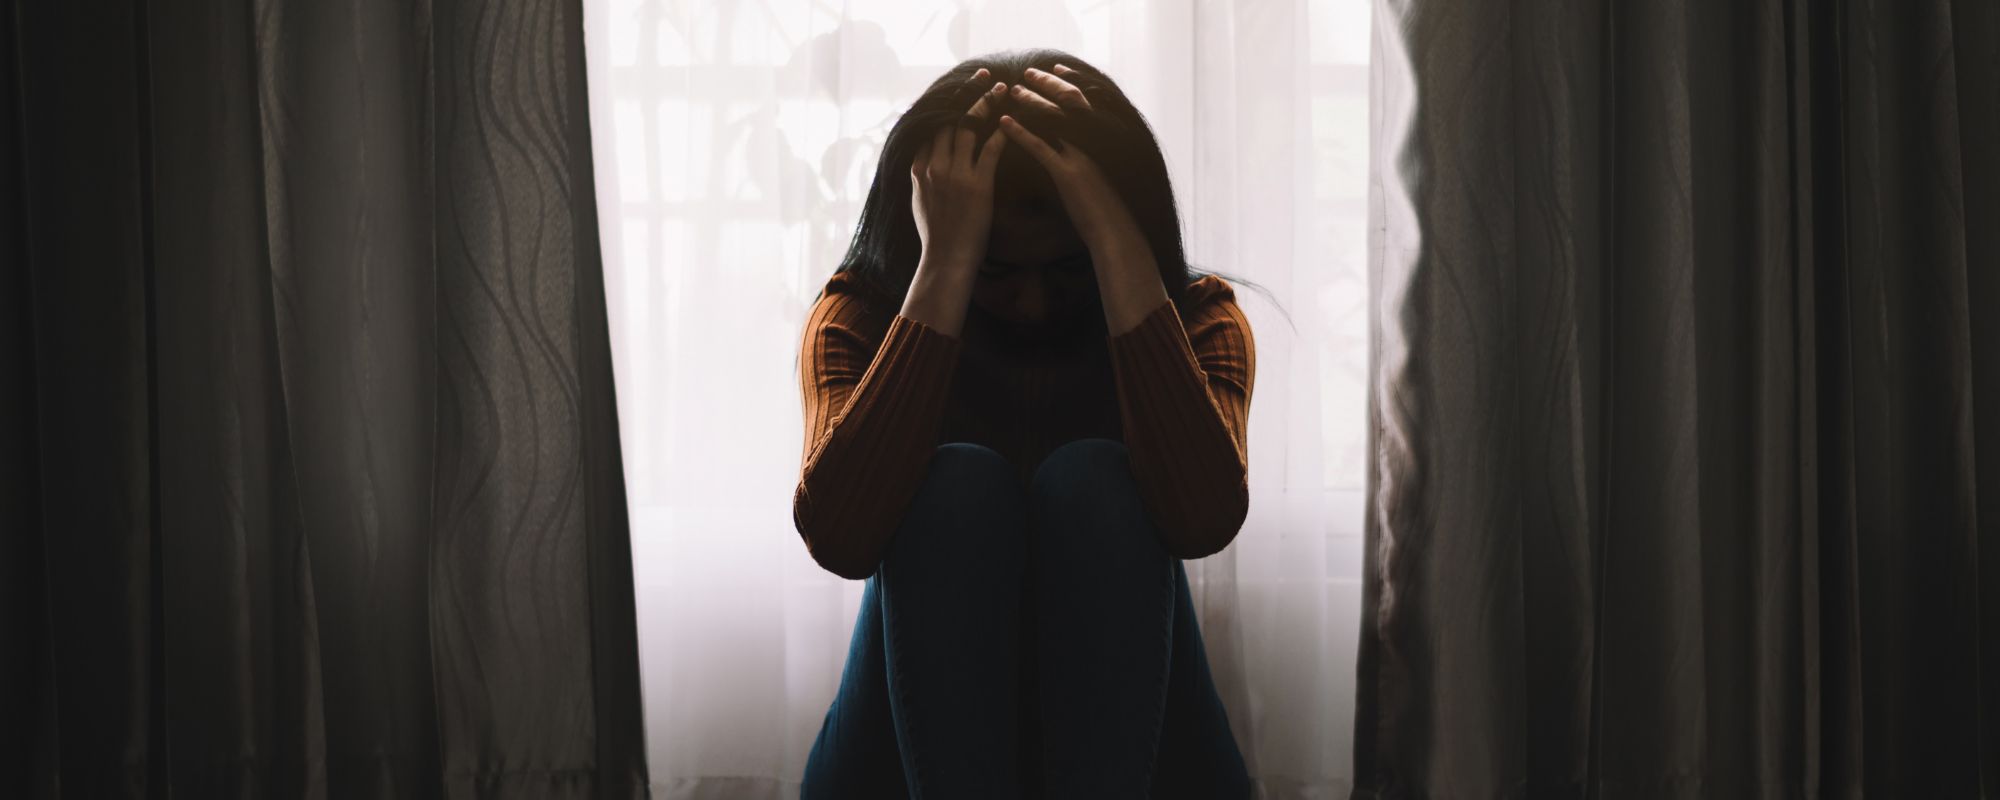 Depressive Disorder Treatment in New Jersey